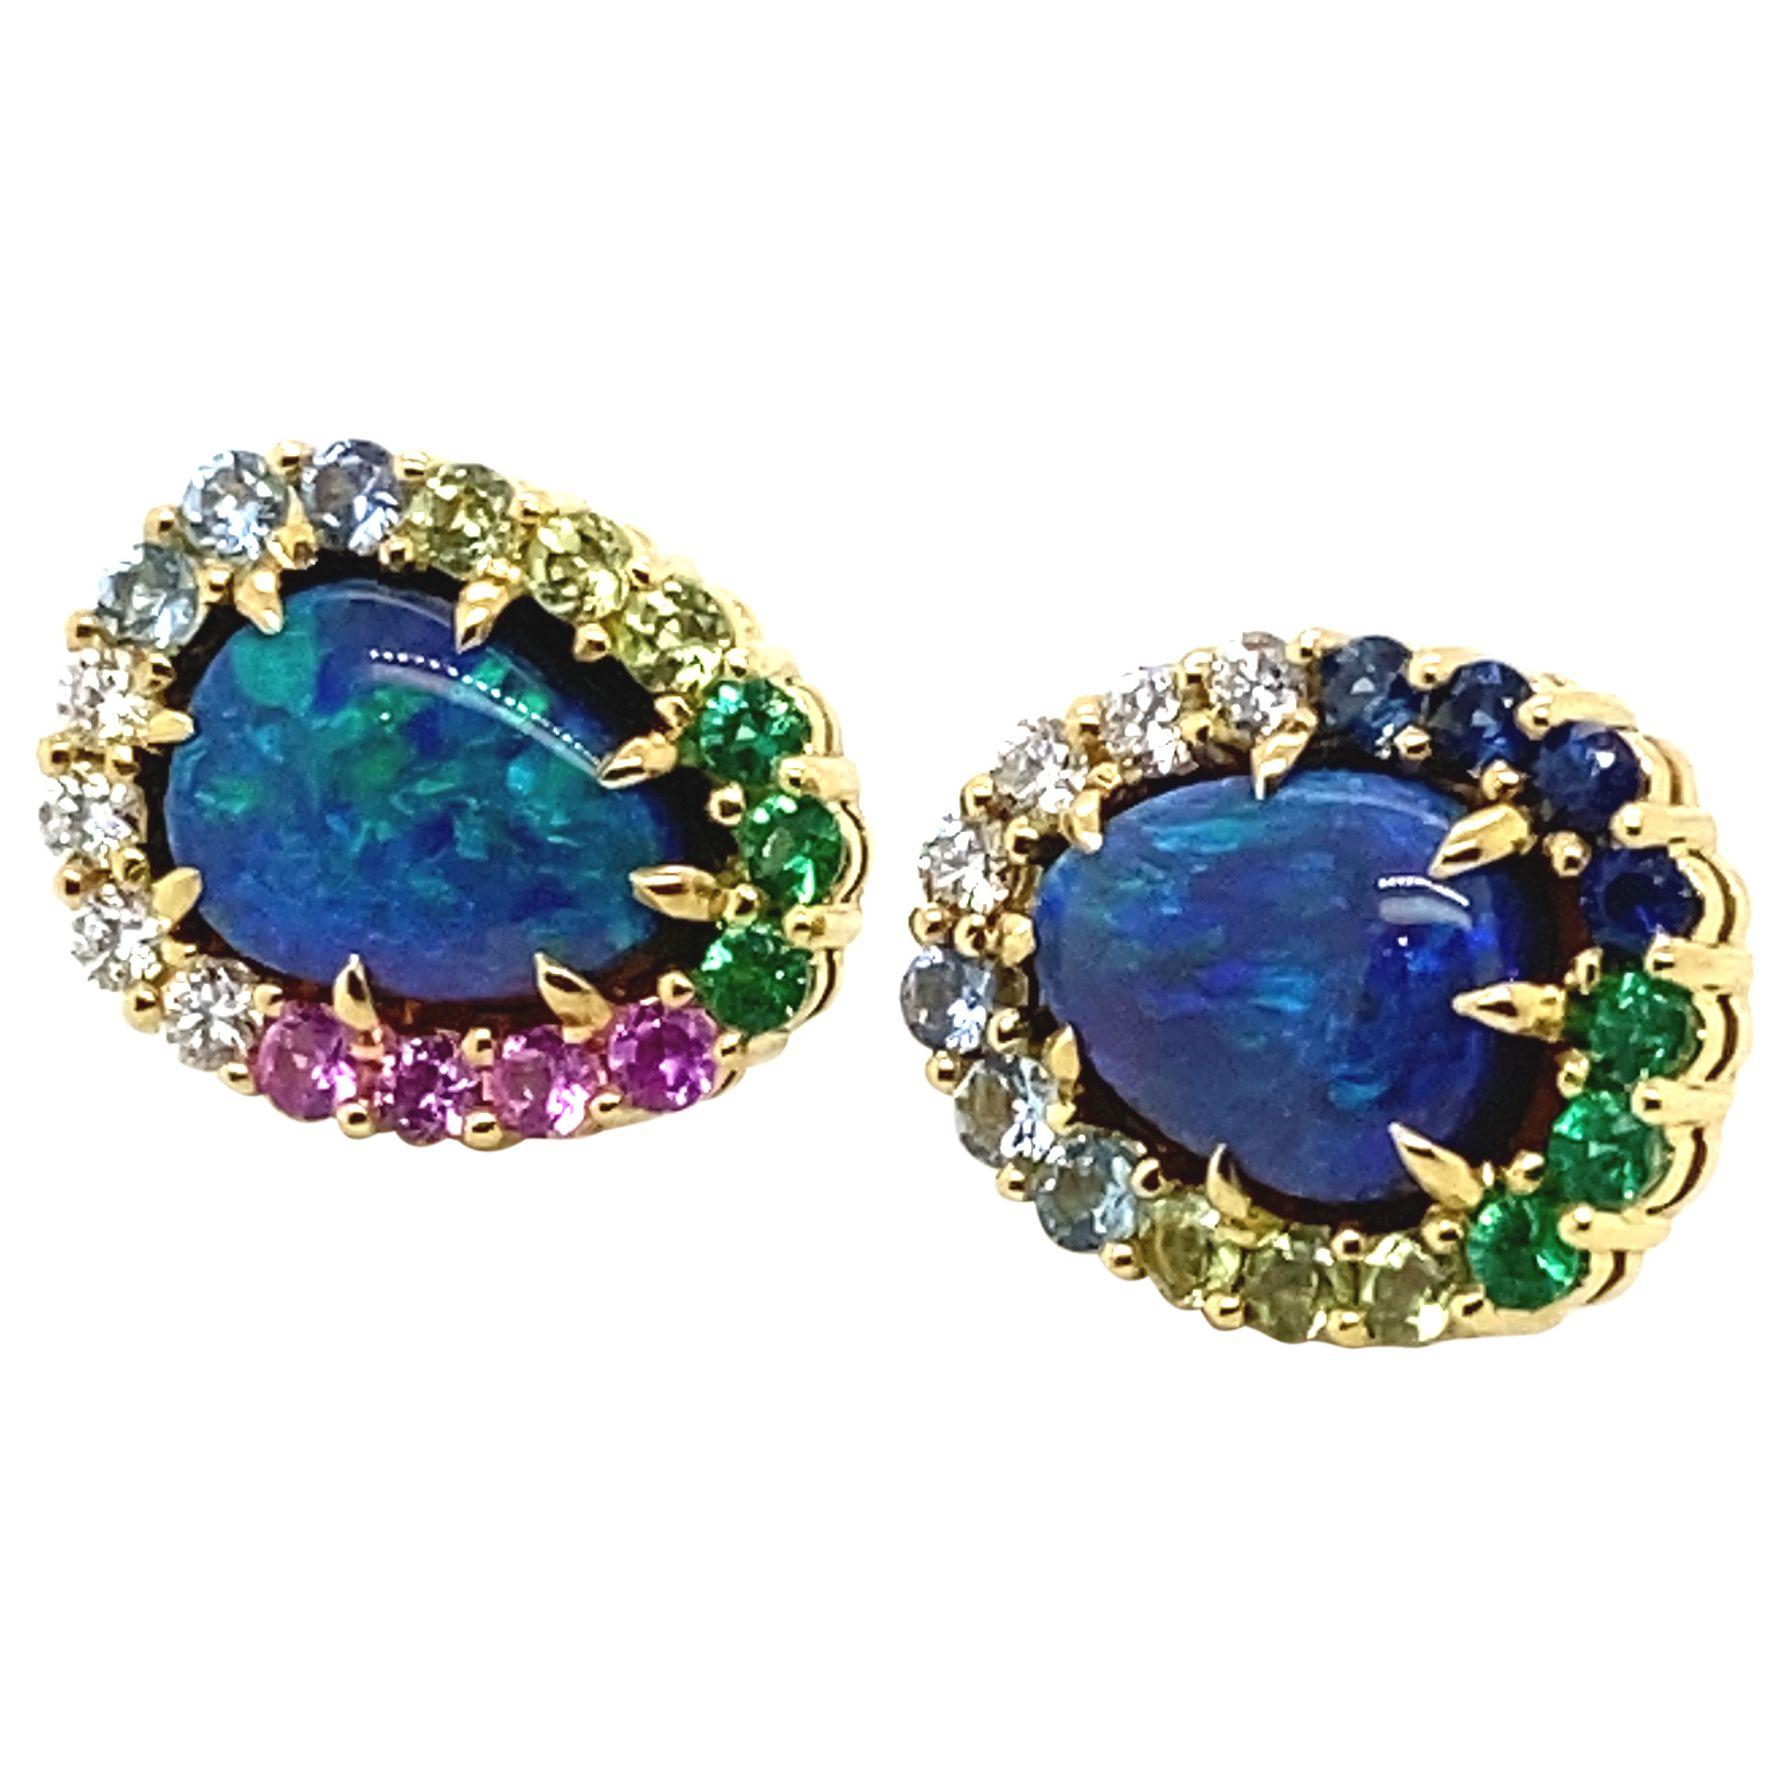 Lightning Ridge in New South Wales, Australia has the most wonderful opals on earth. Renowned for the prestigious black opal which is adorned by opal lovers worldwide. It's not easy to find these remarkable gemstones, you would most likely know that